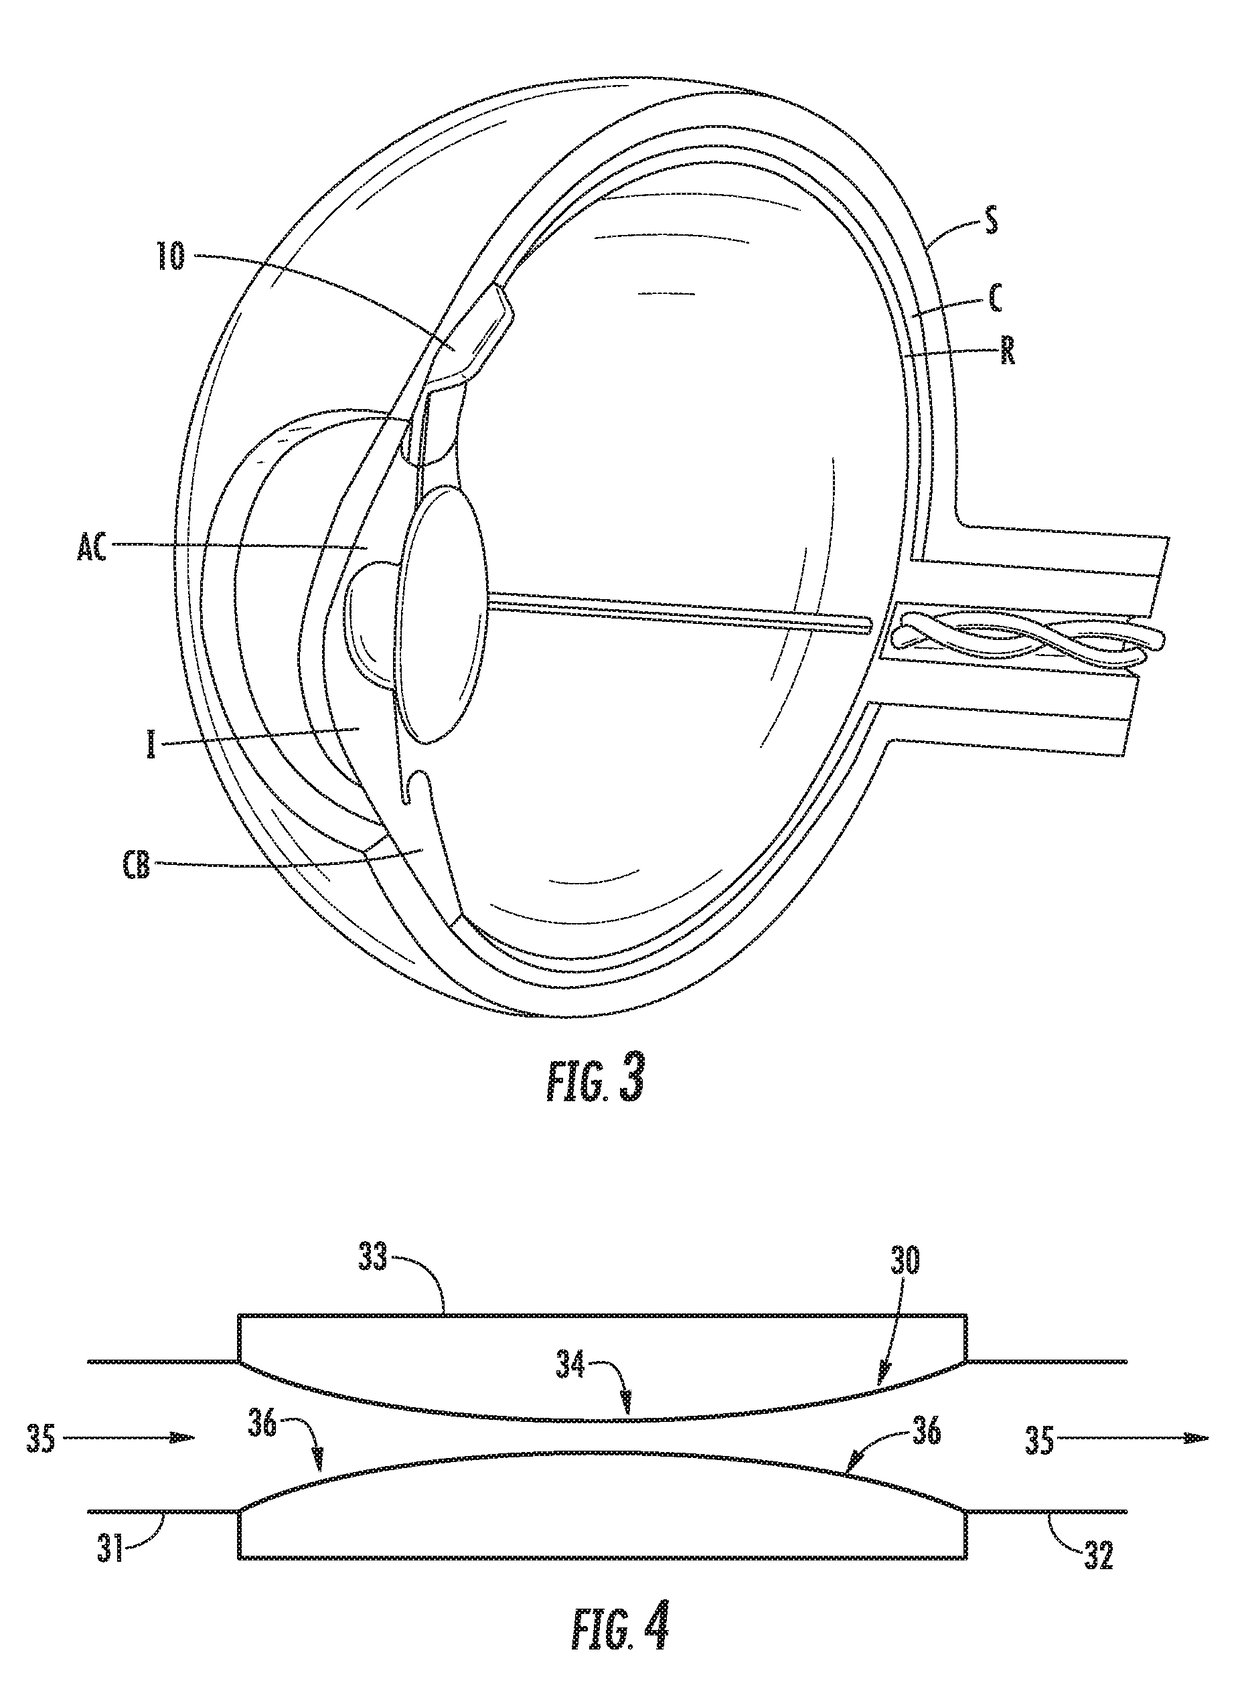 Apparatus for treating excess intraocular fluid